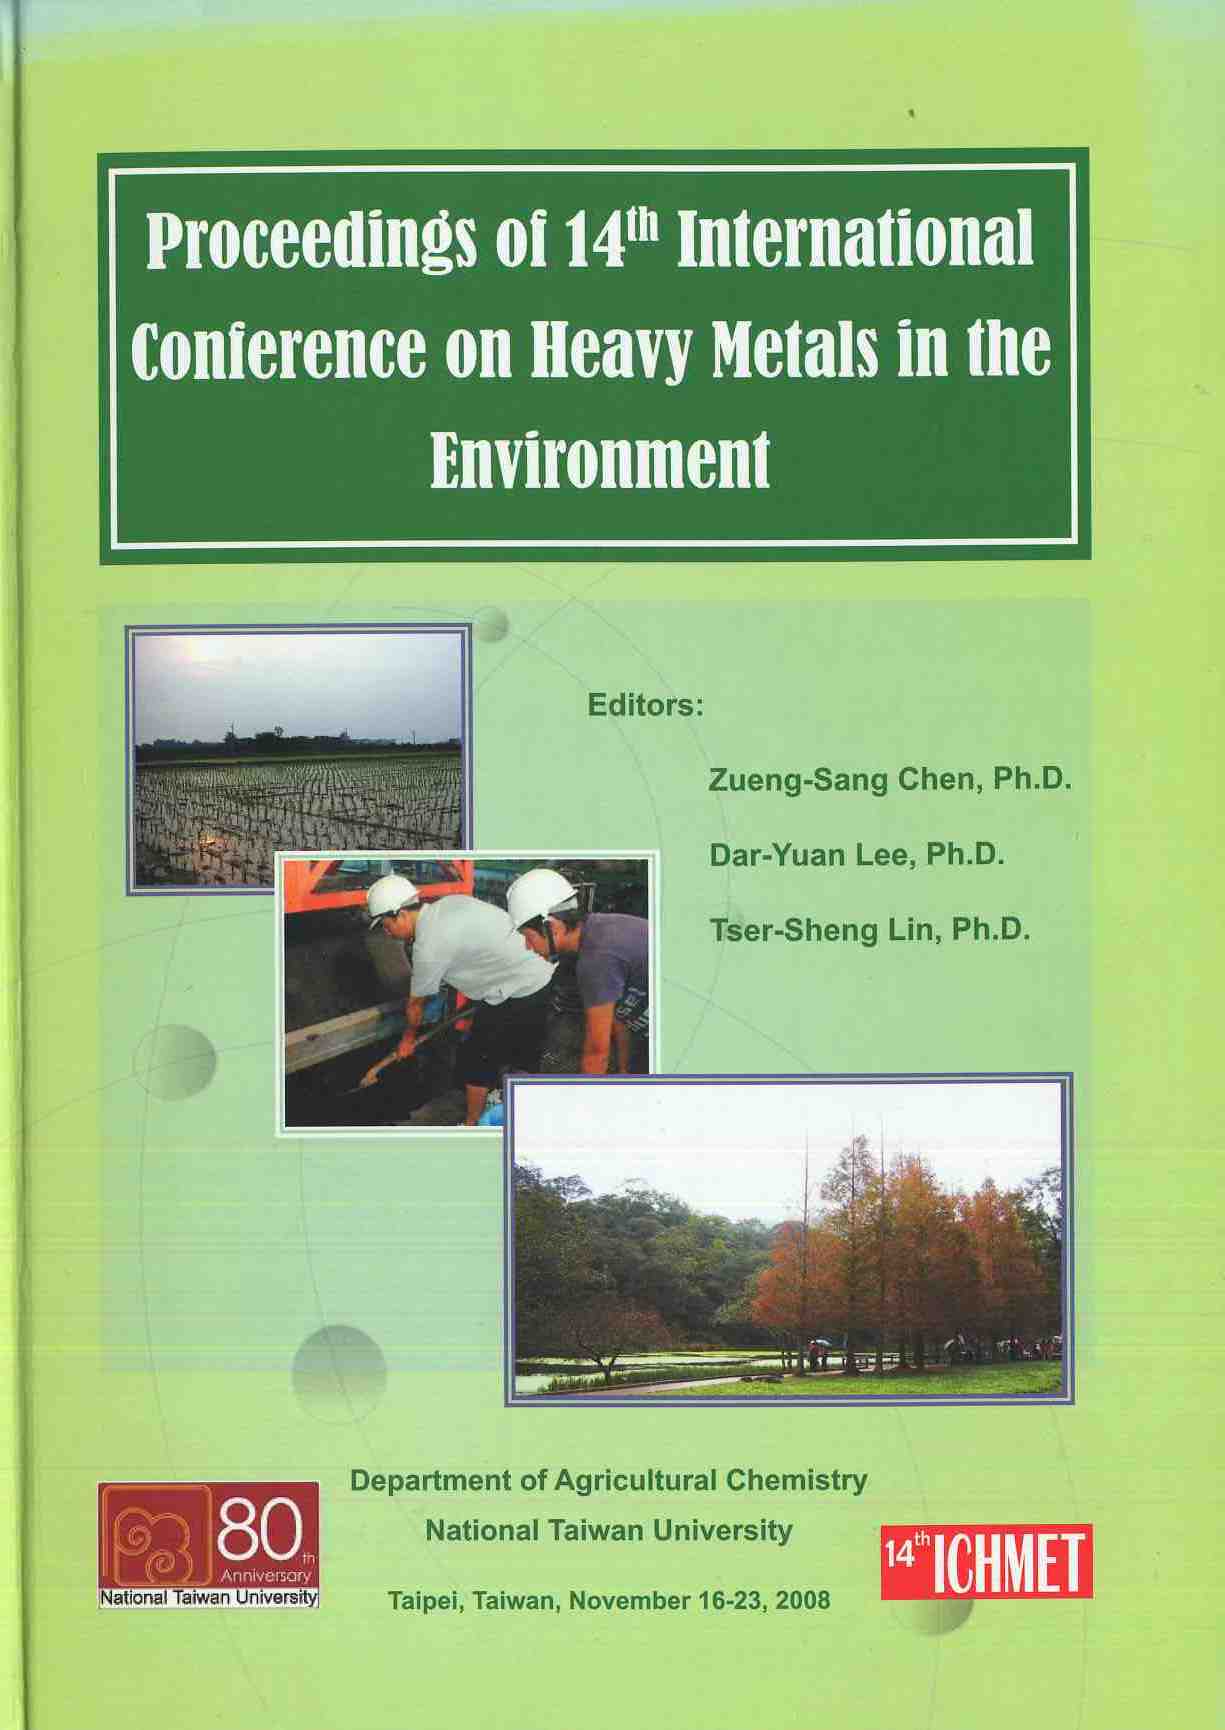 Proceedings of 14th International Conference on Heavy Metals in the Environment